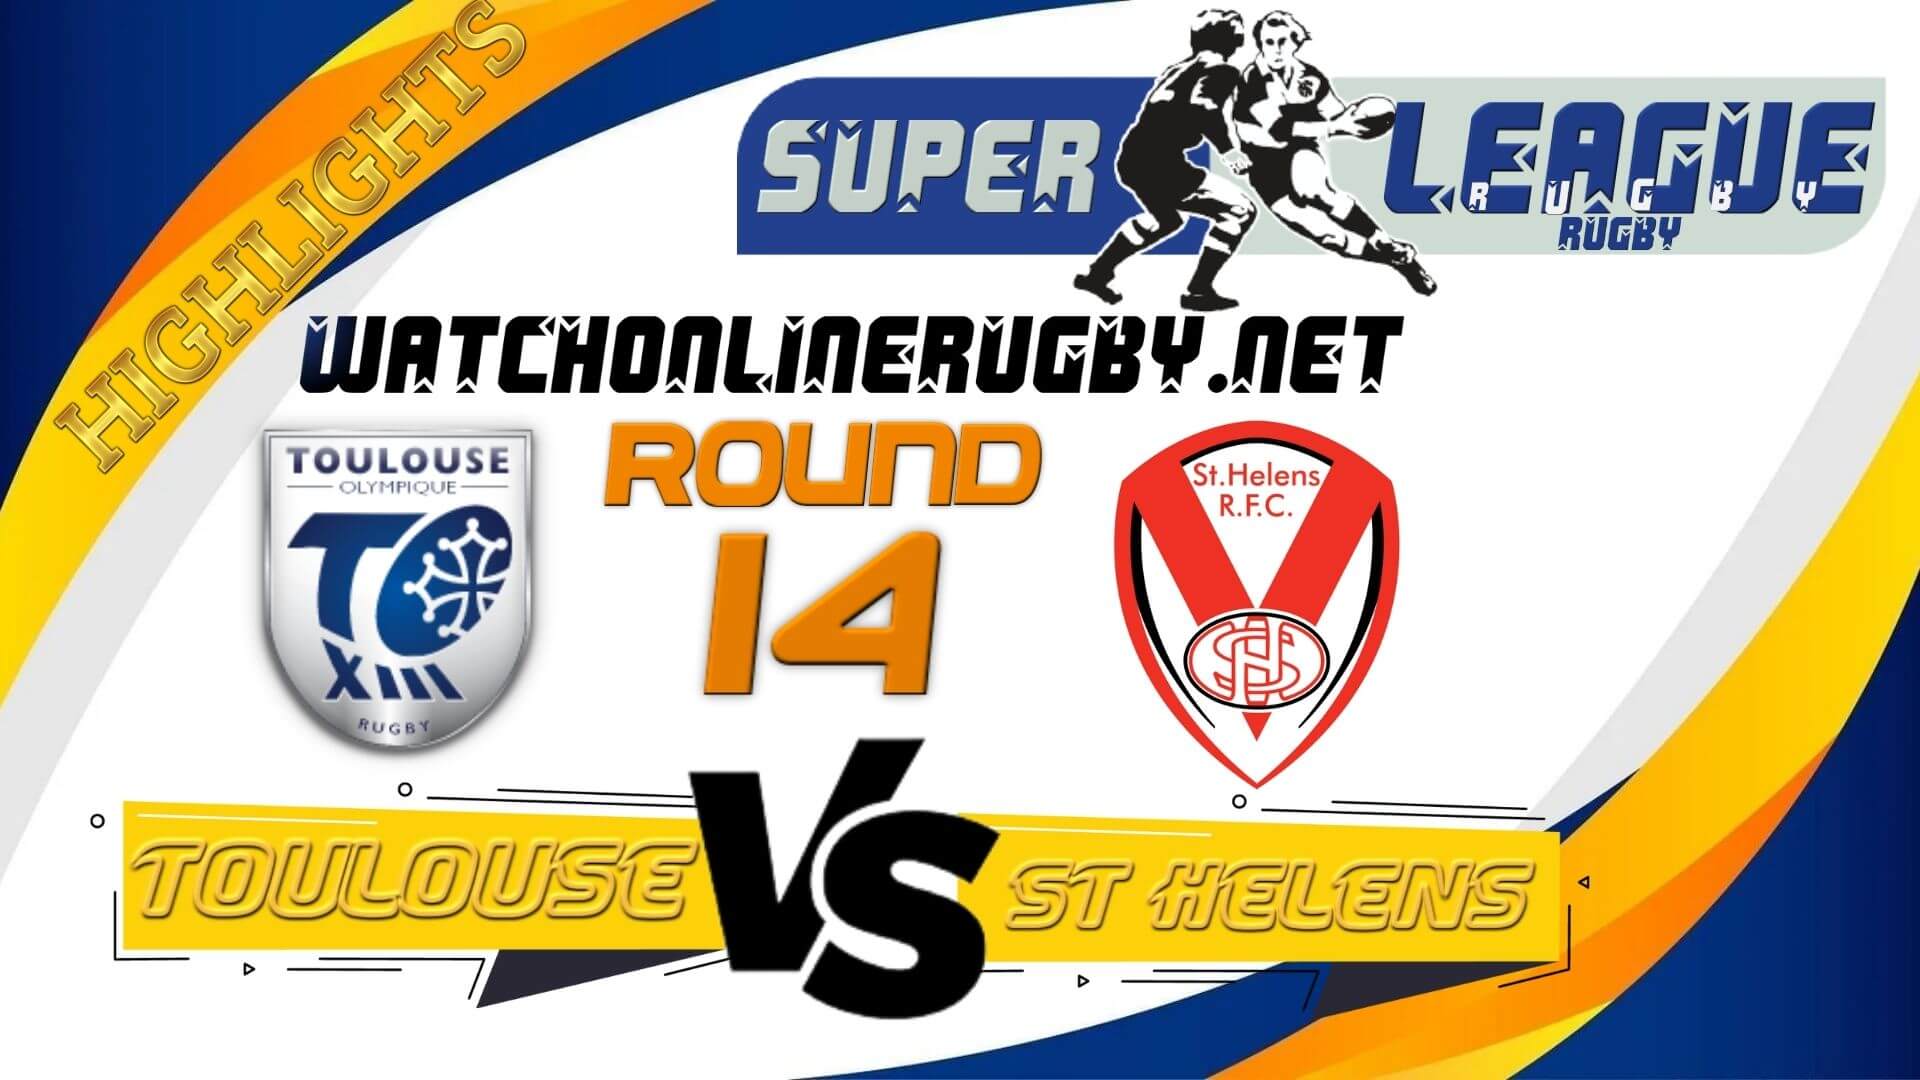 Toulouse Vs St Helens Super League Rugby 2022 RD 14